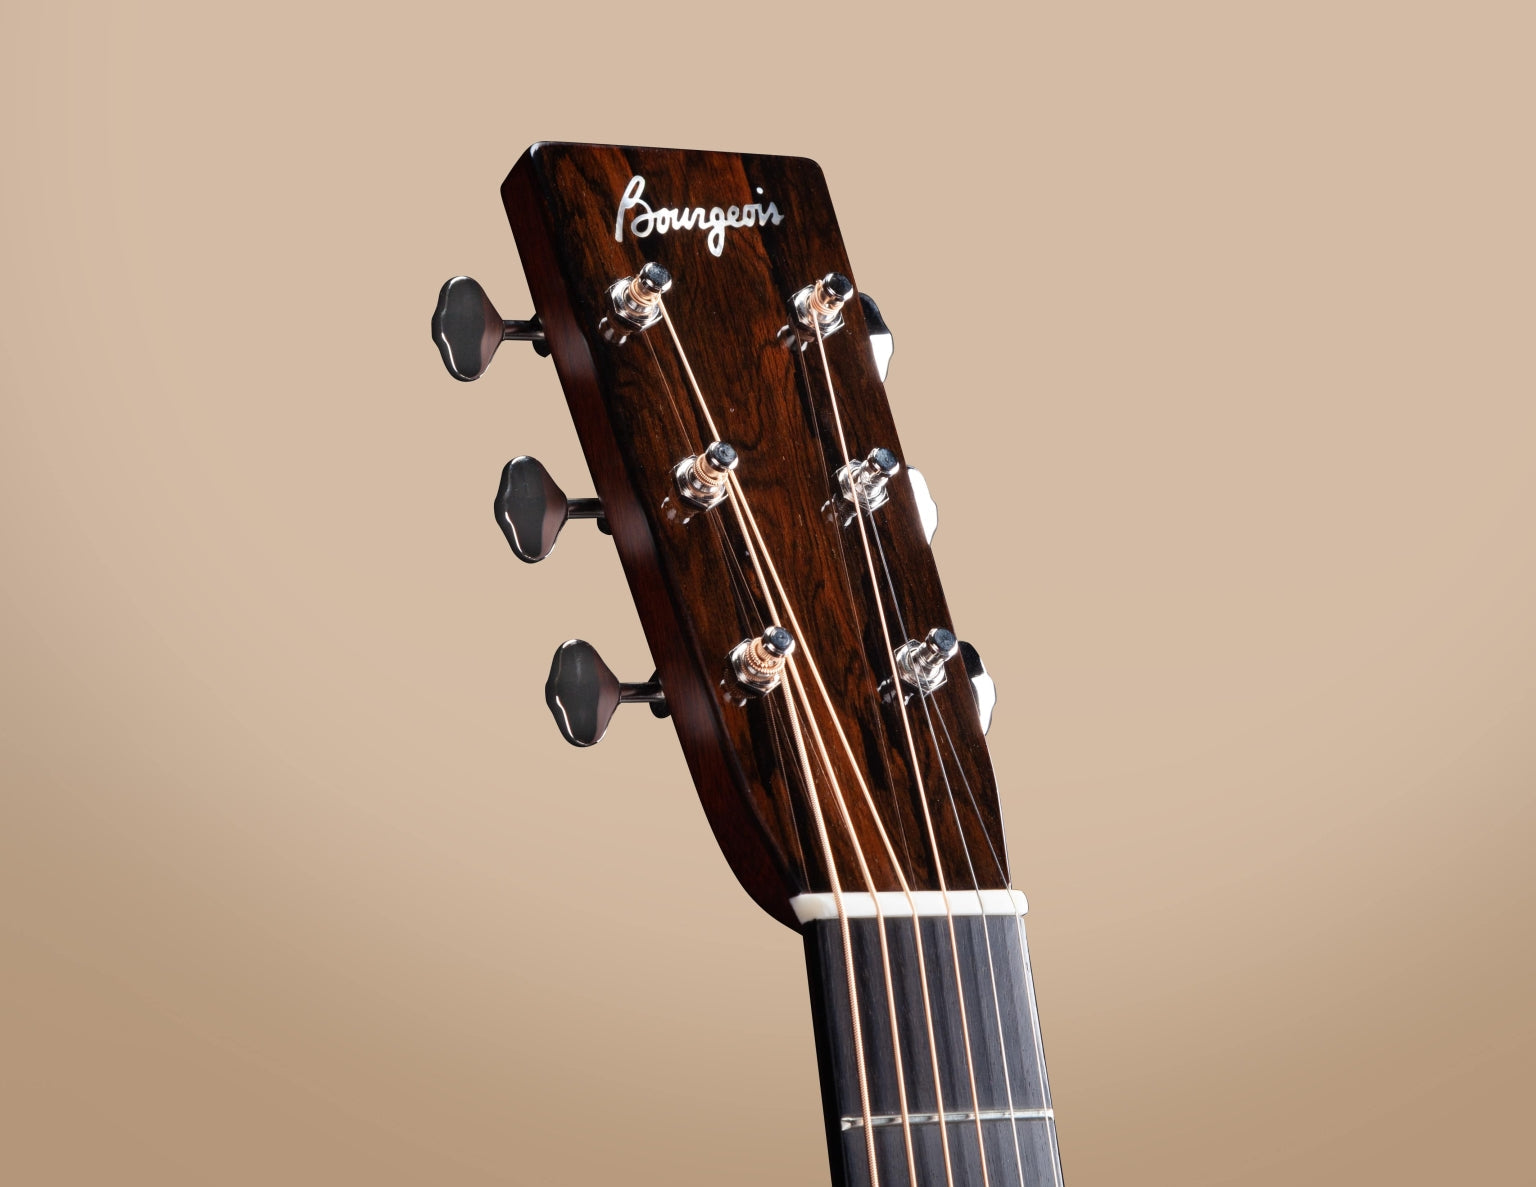 Bourgeois Touchstone Vintage DV/TS Dreadnought Acoustic Guitar, Acoustic Guitar for sale at Richards Guitars.